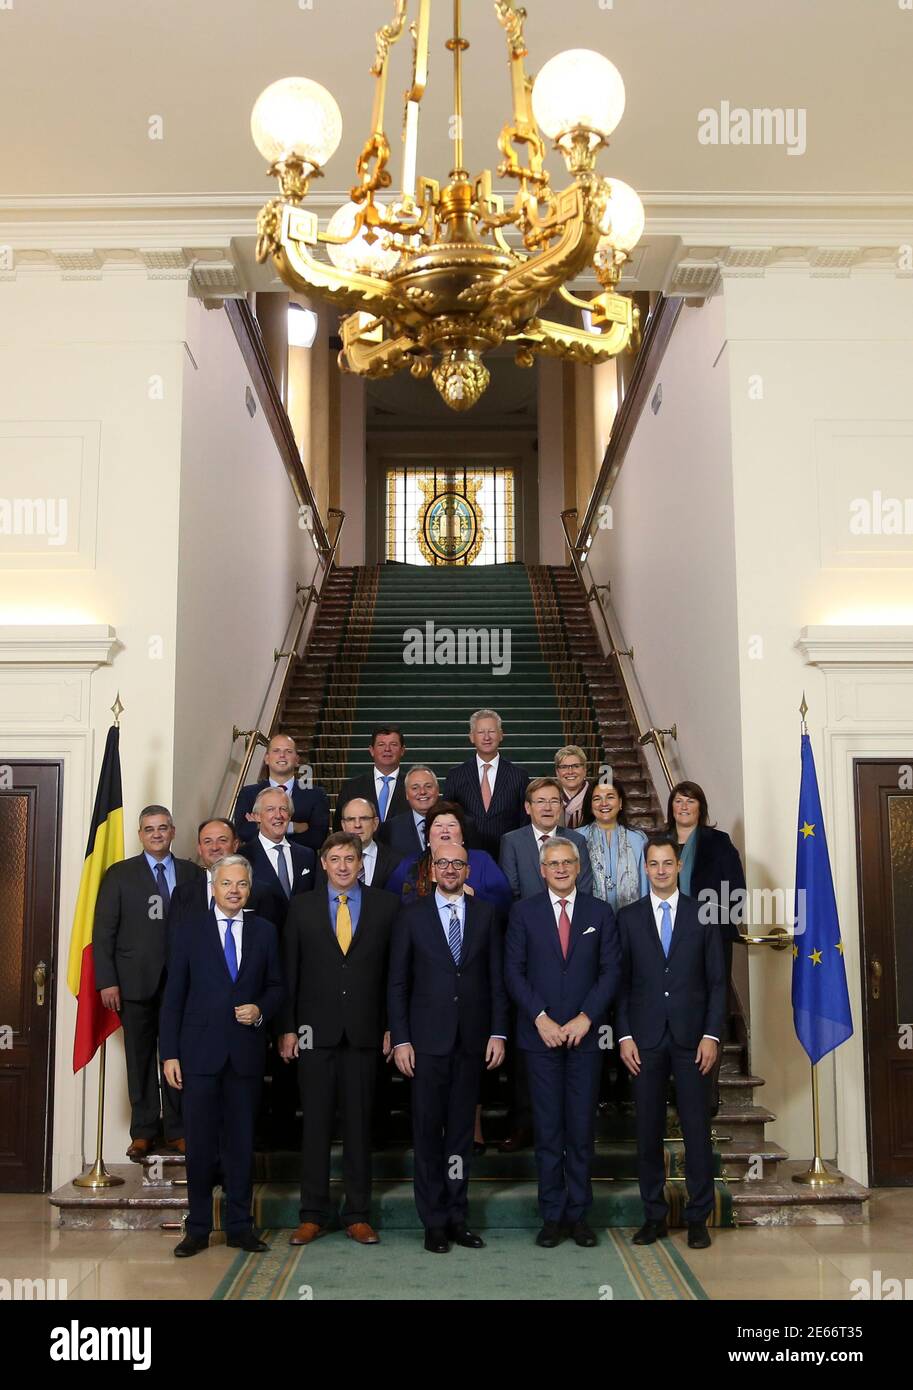 Belgium's new Prime Minister Charles Michel (front C) poses for a group photo with members of the new Belgian government at Belgian Parliament in Brussels October 11, 2014. Belgium's new federal government is formed by a centre-right coalition of liberals, Christian Democrats and a Flemish regional, including Flemish nationalist party N-VA.   REUTERS/Francois Lenoir (BELGIUM  - Tags: POLITICS) Stock Photo